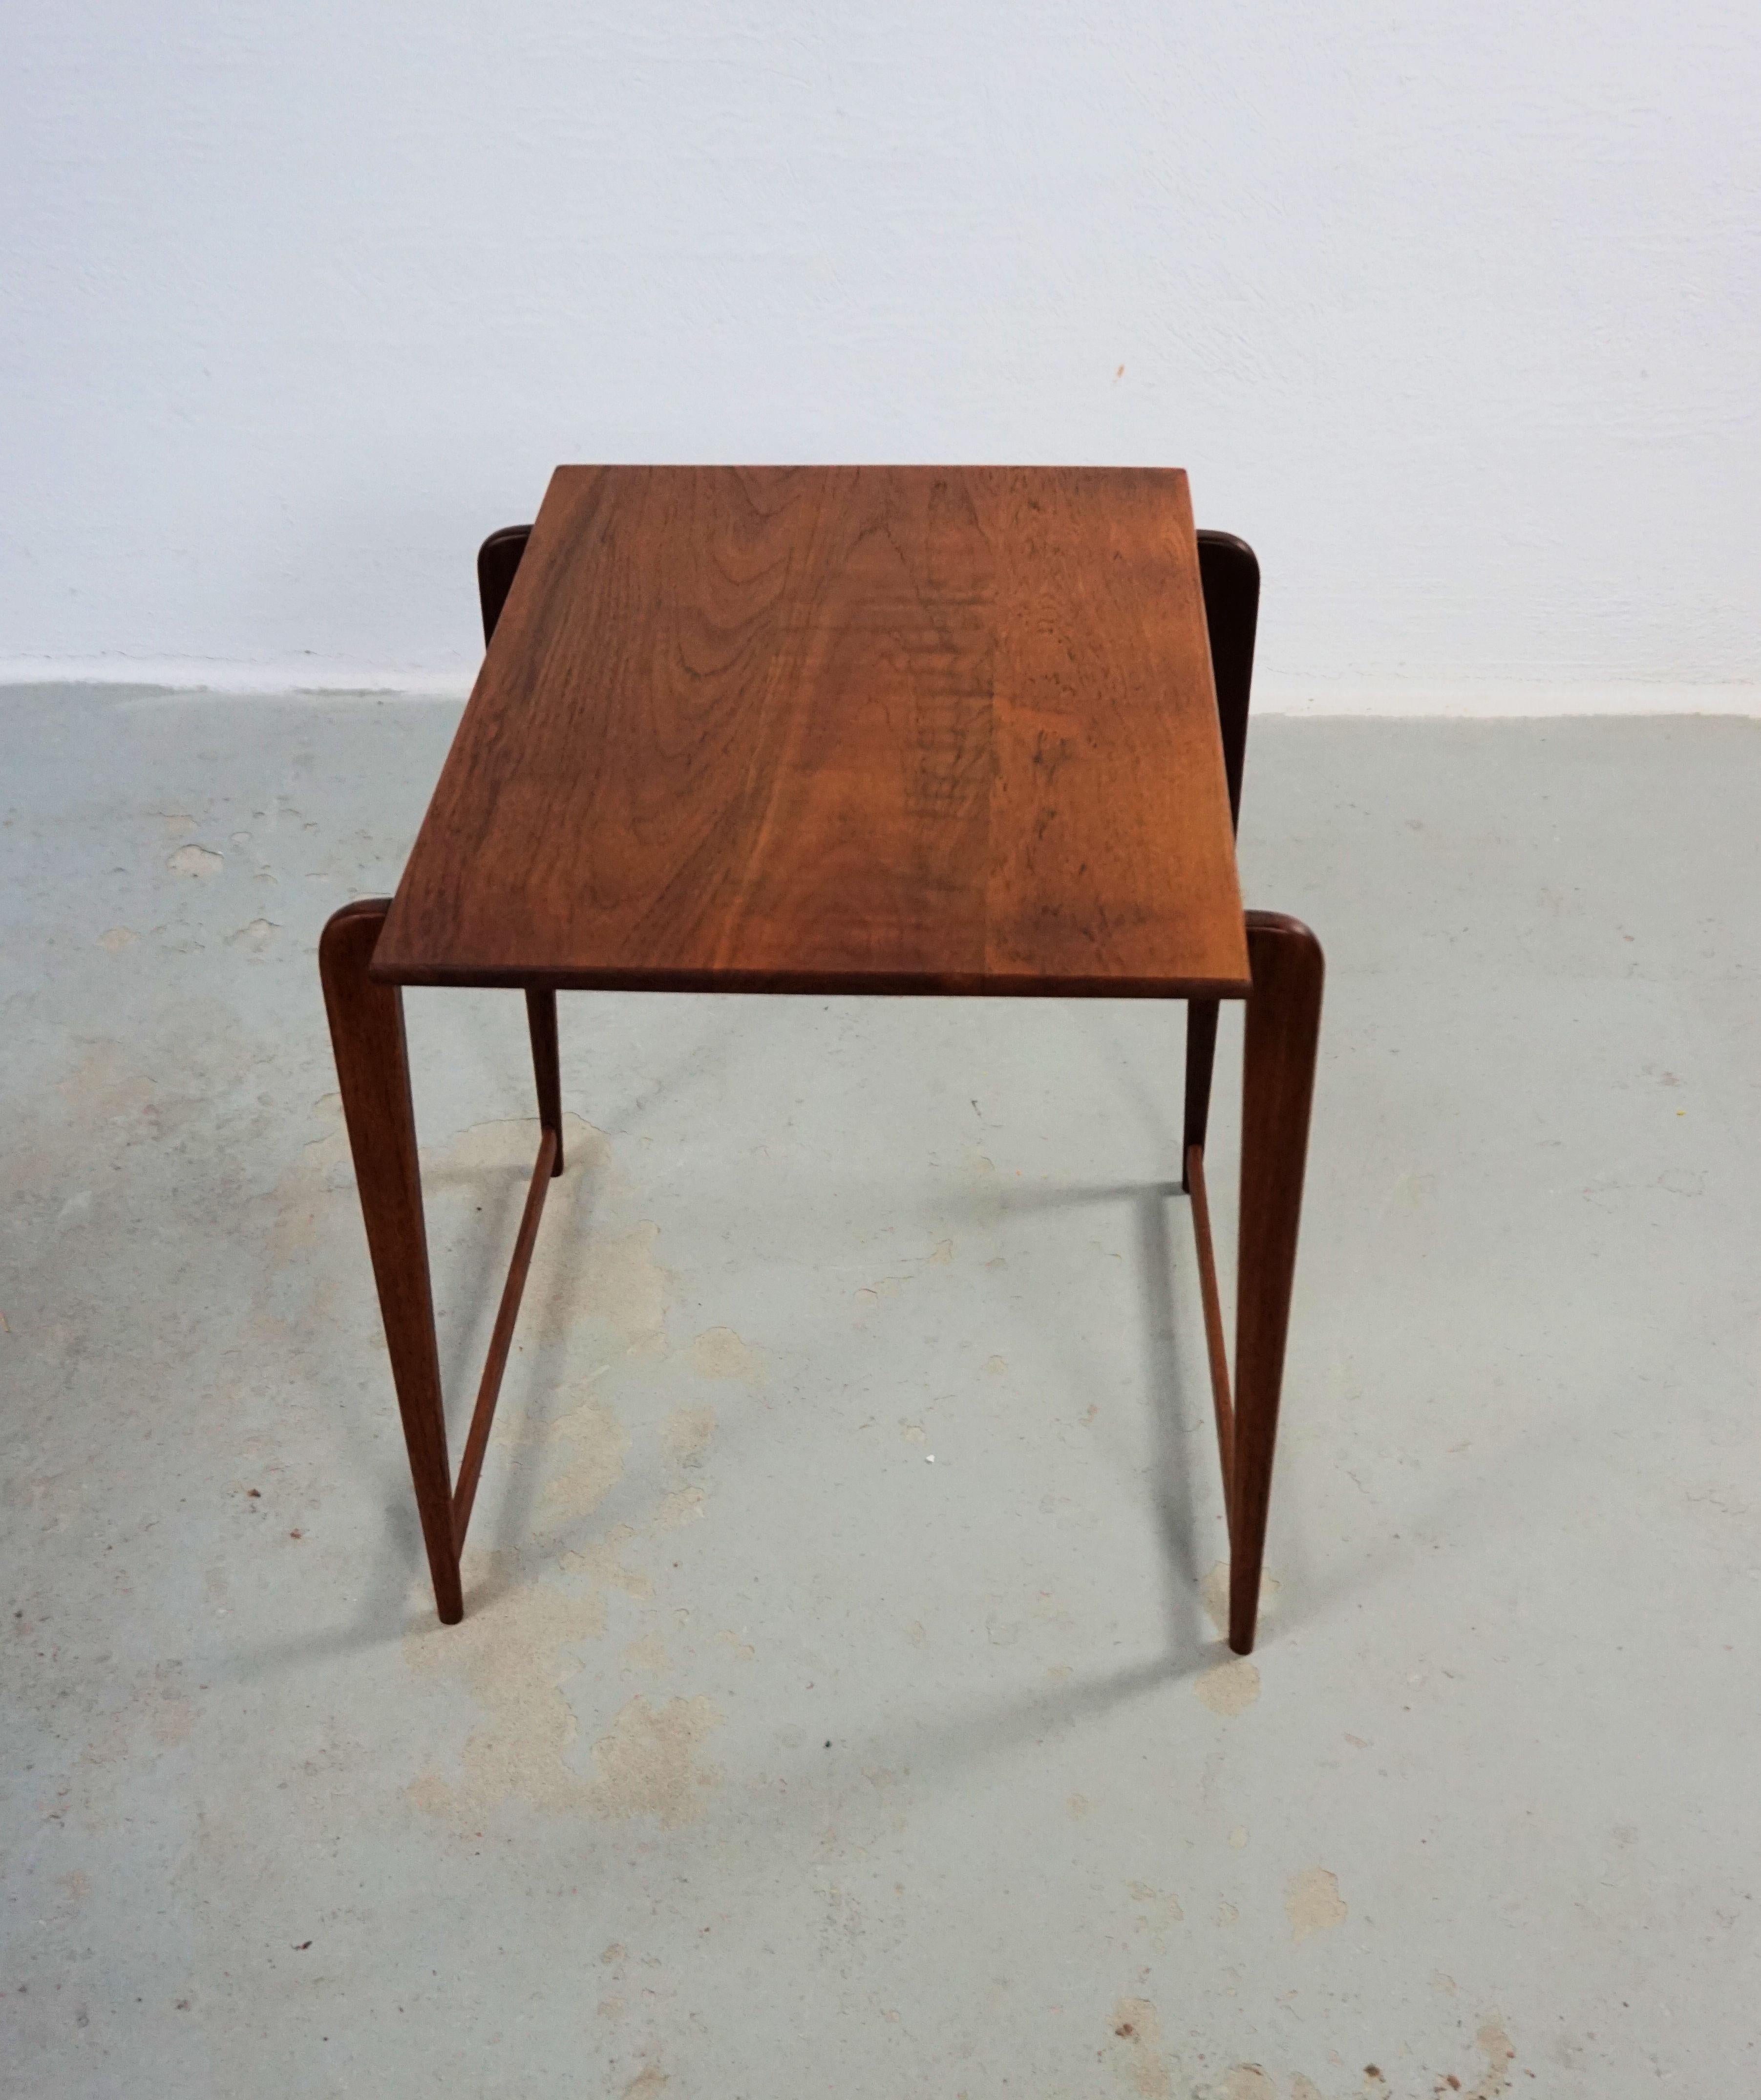 1950s fully restored Danish small side table in teak - shipping included.

The small sidetable with it's thin very elegant design where few and small details create a slimlined minimalistic elegant piece of furnite is an early example of the